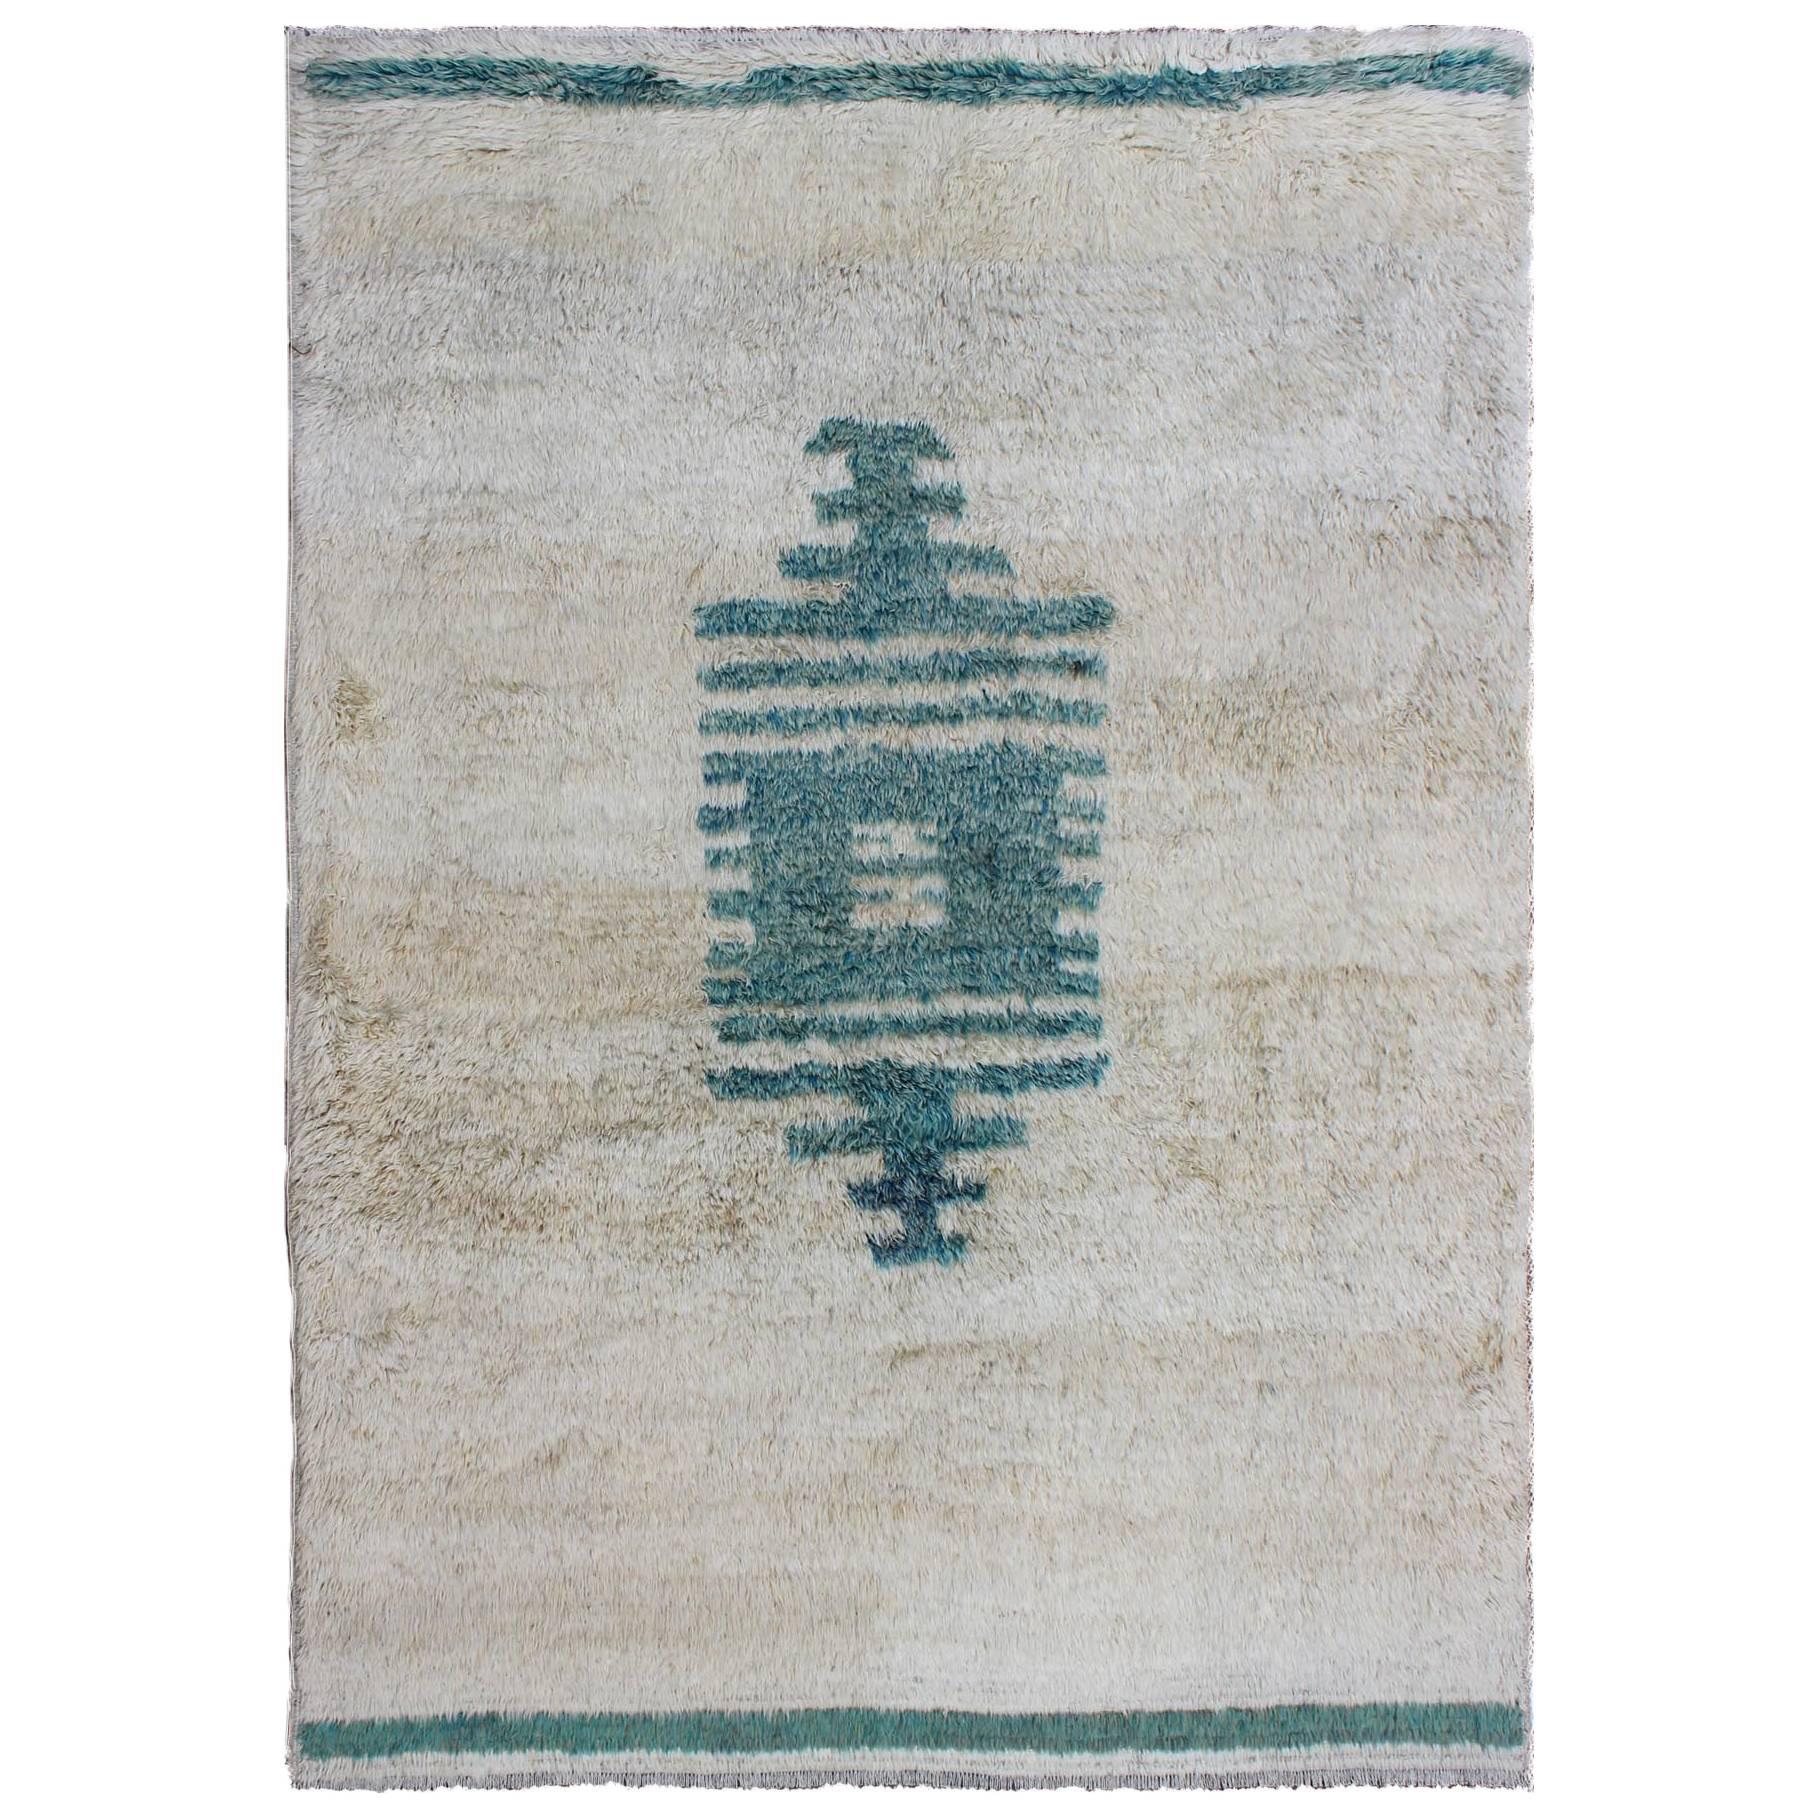 Unique Turkish Vintage Tulu Rug with Modern Design in Teal & Off White 